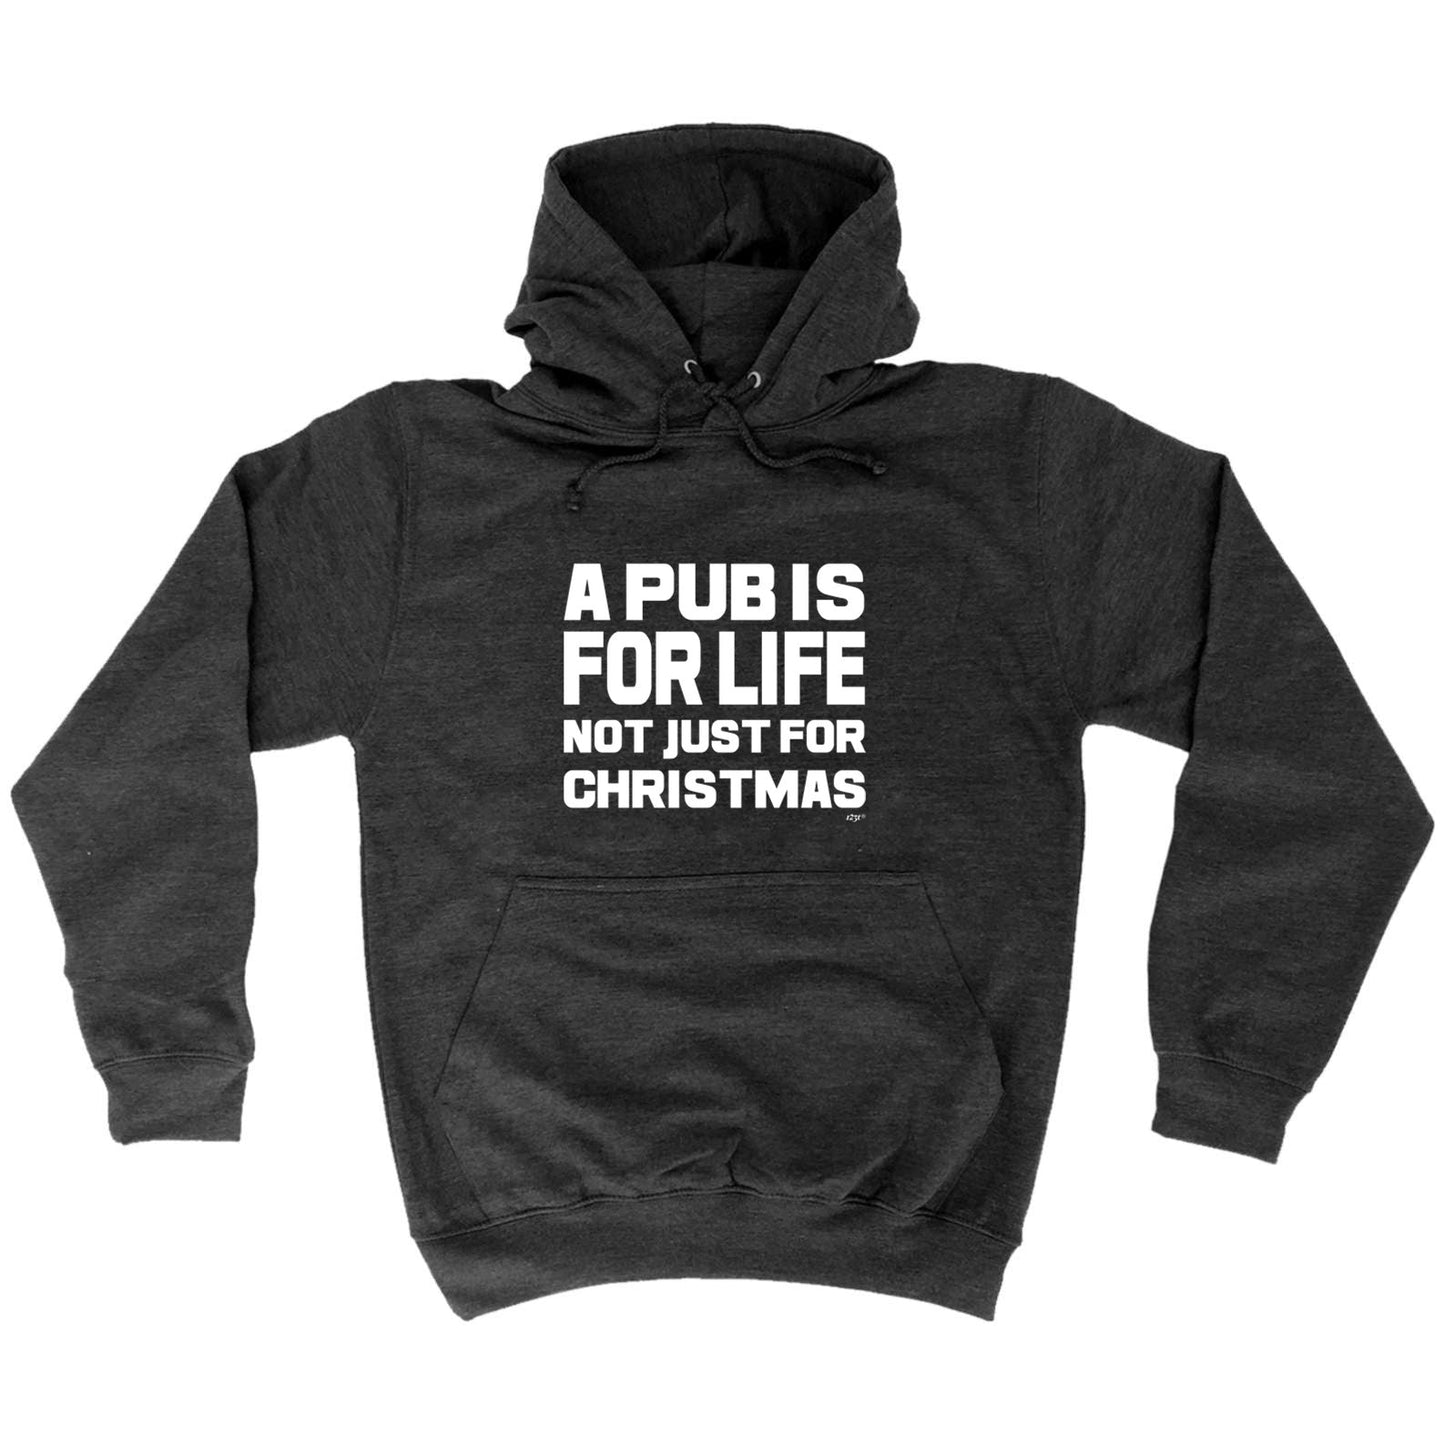 A Pub Is For Life Not Just For Christmas - Funny Hoodies Hoodie